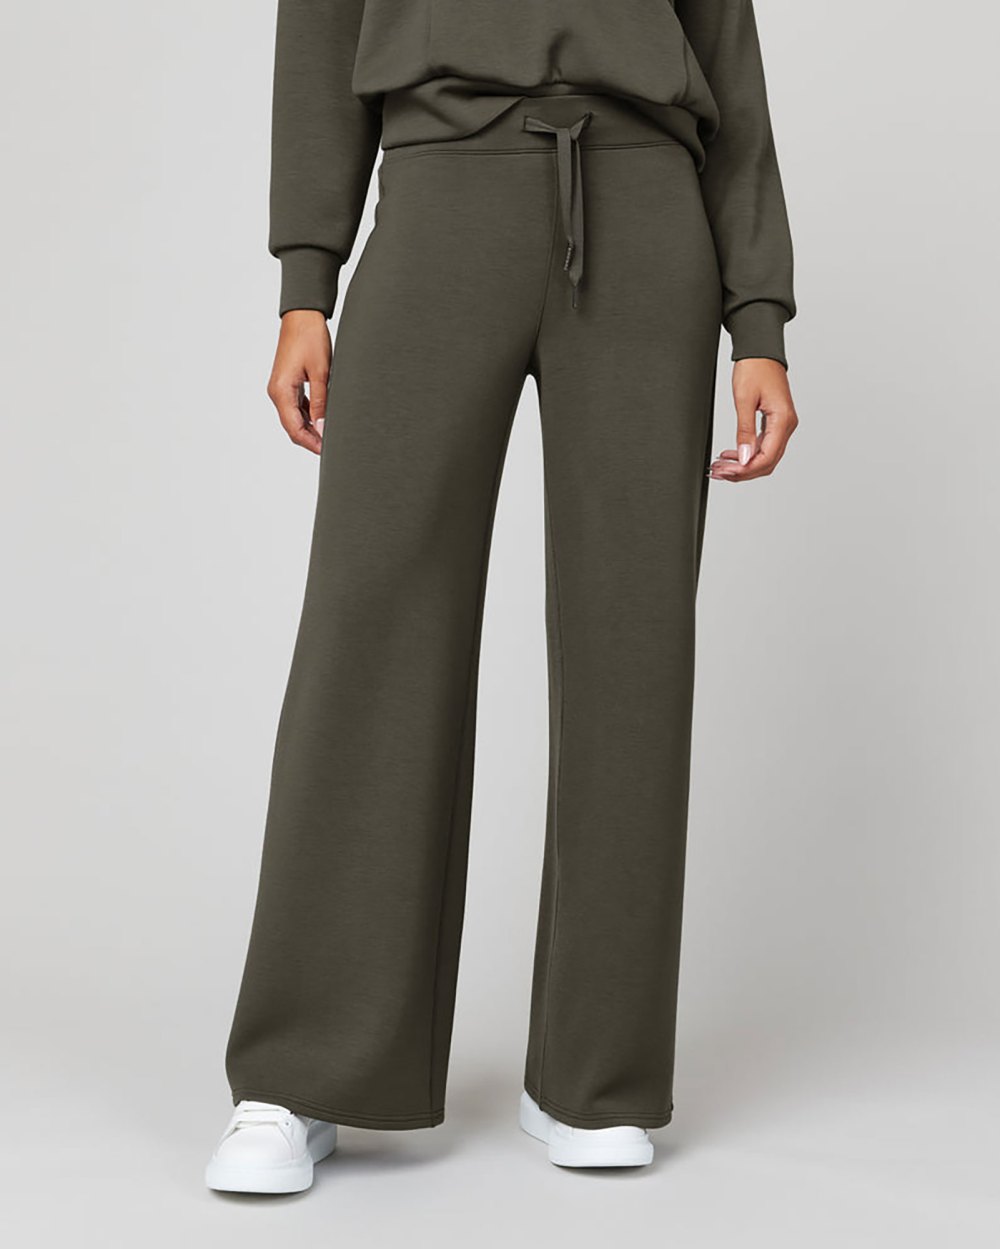 Loungewear Just Got More ‘Flattering’! The Spanx Wide Leg Pant is So Chic and Comfortable